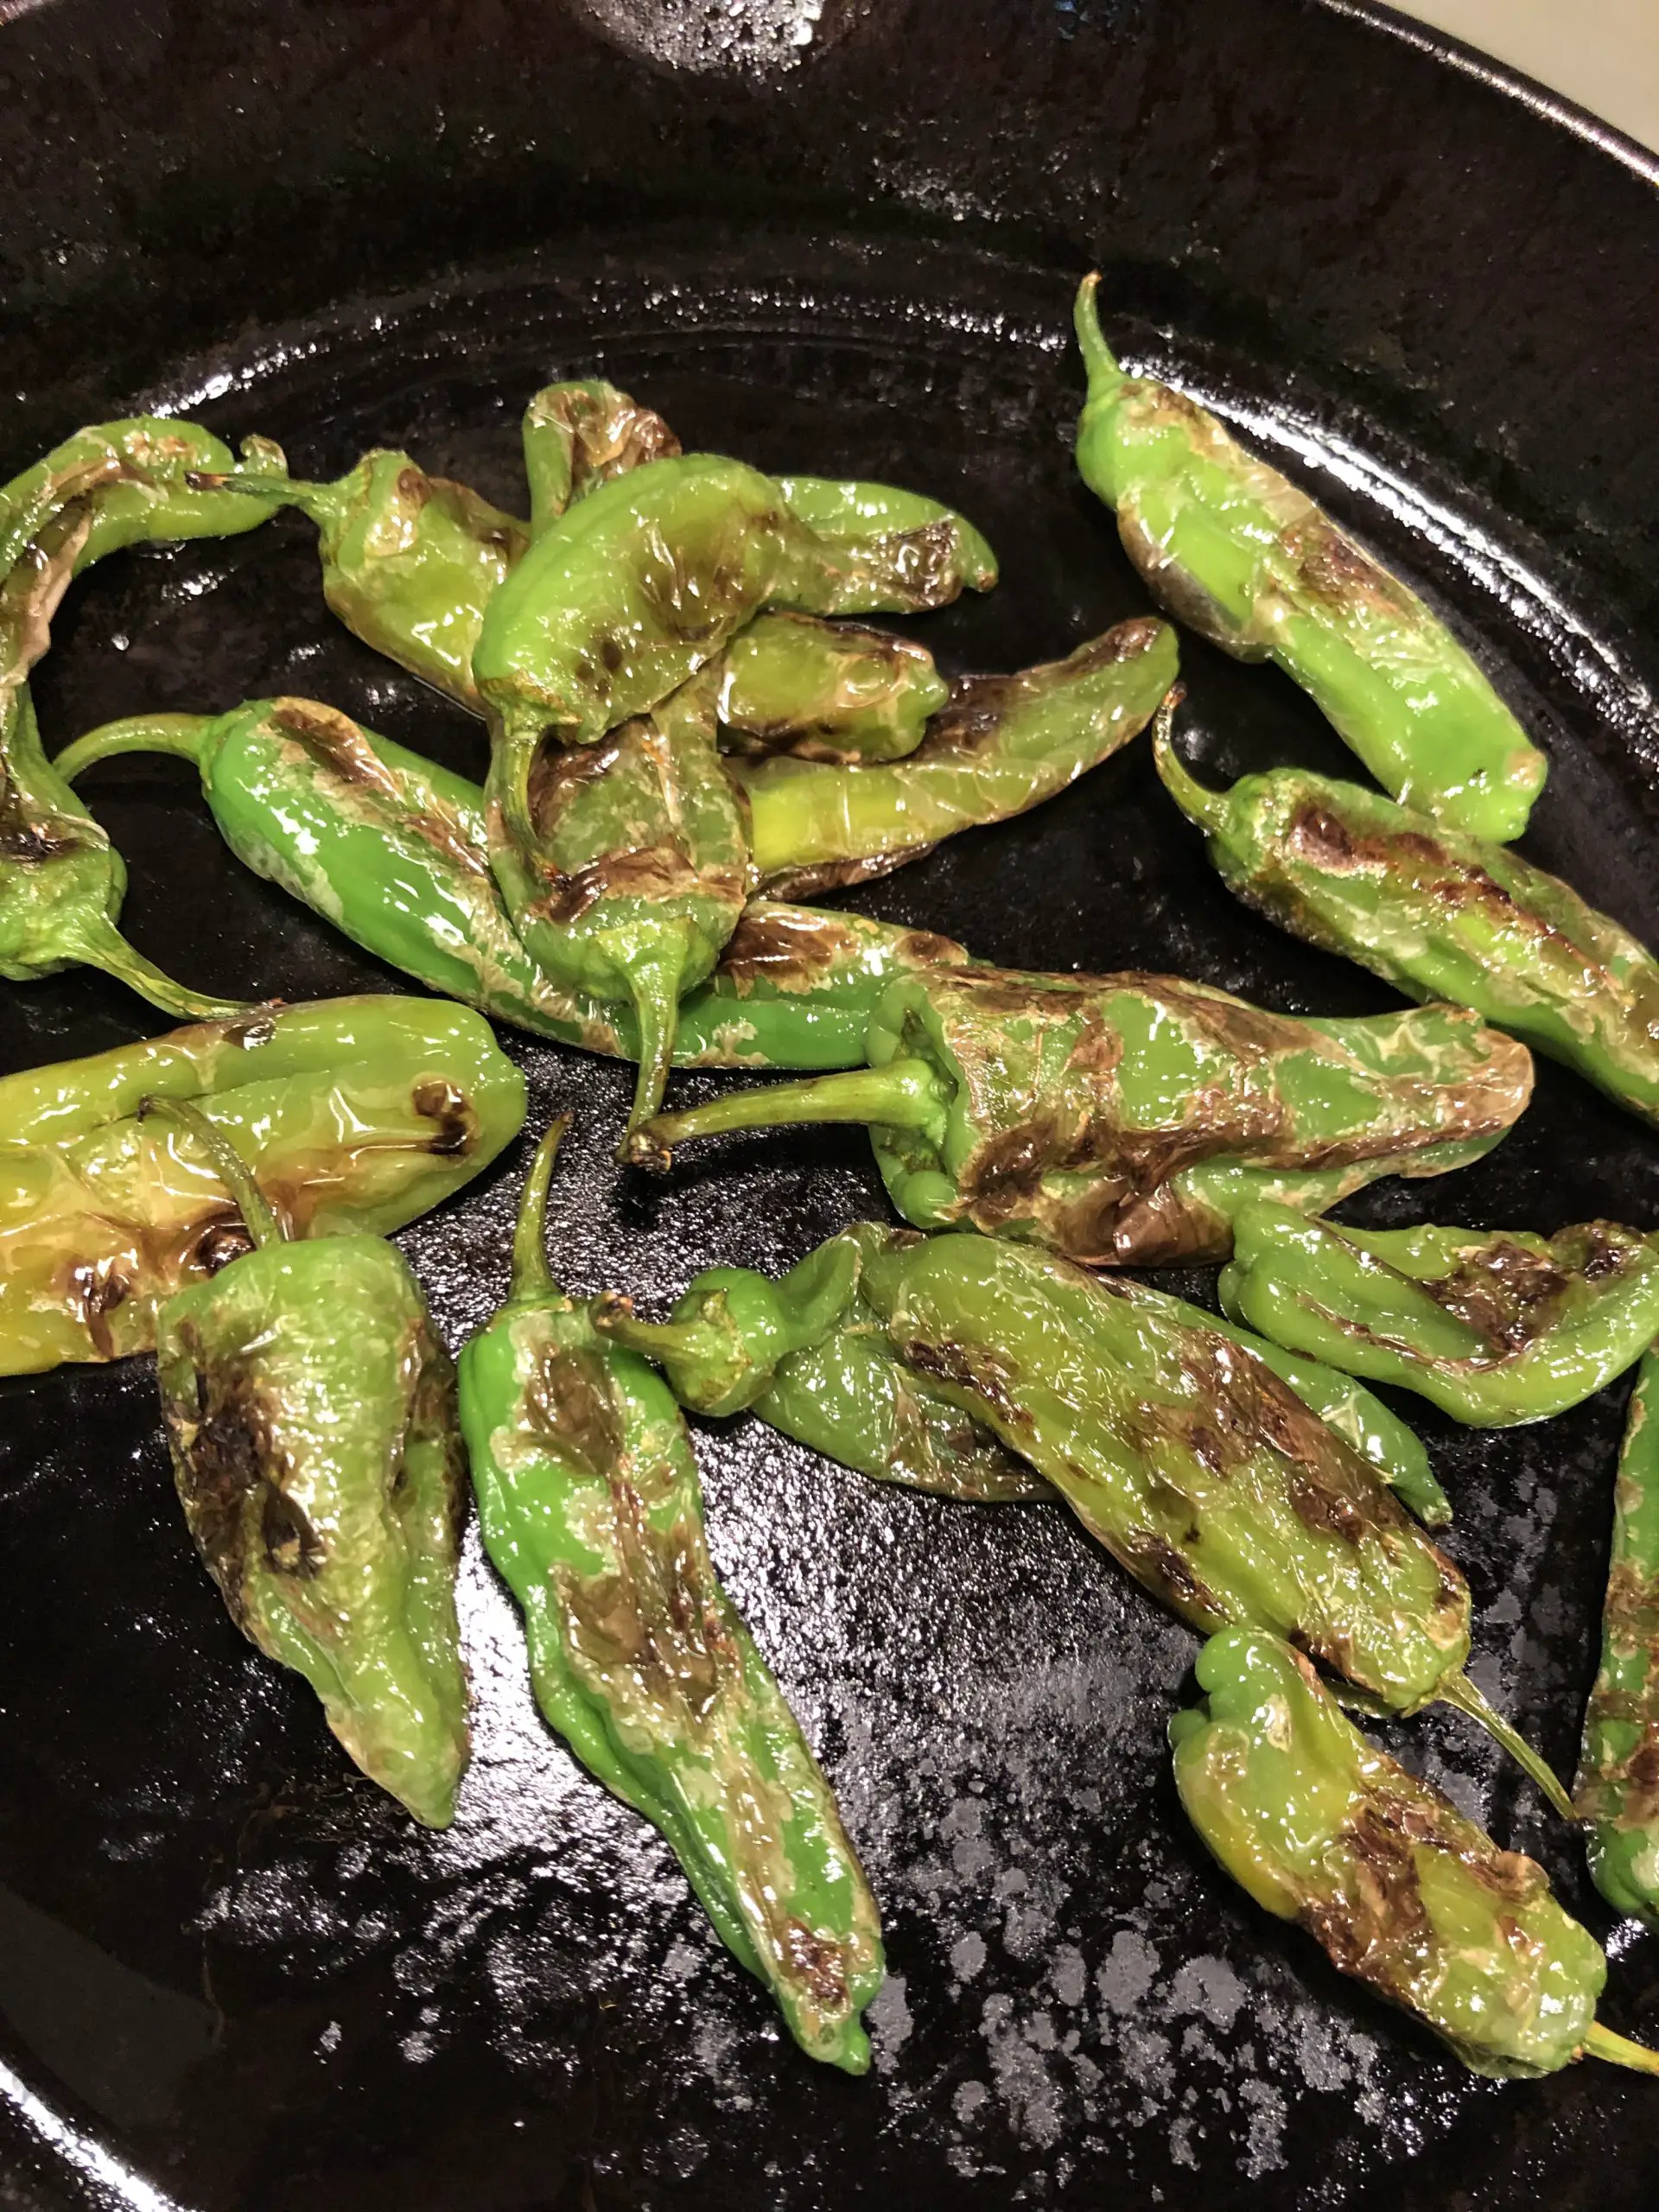 Blistered shishito peppers in a cast iron pan.